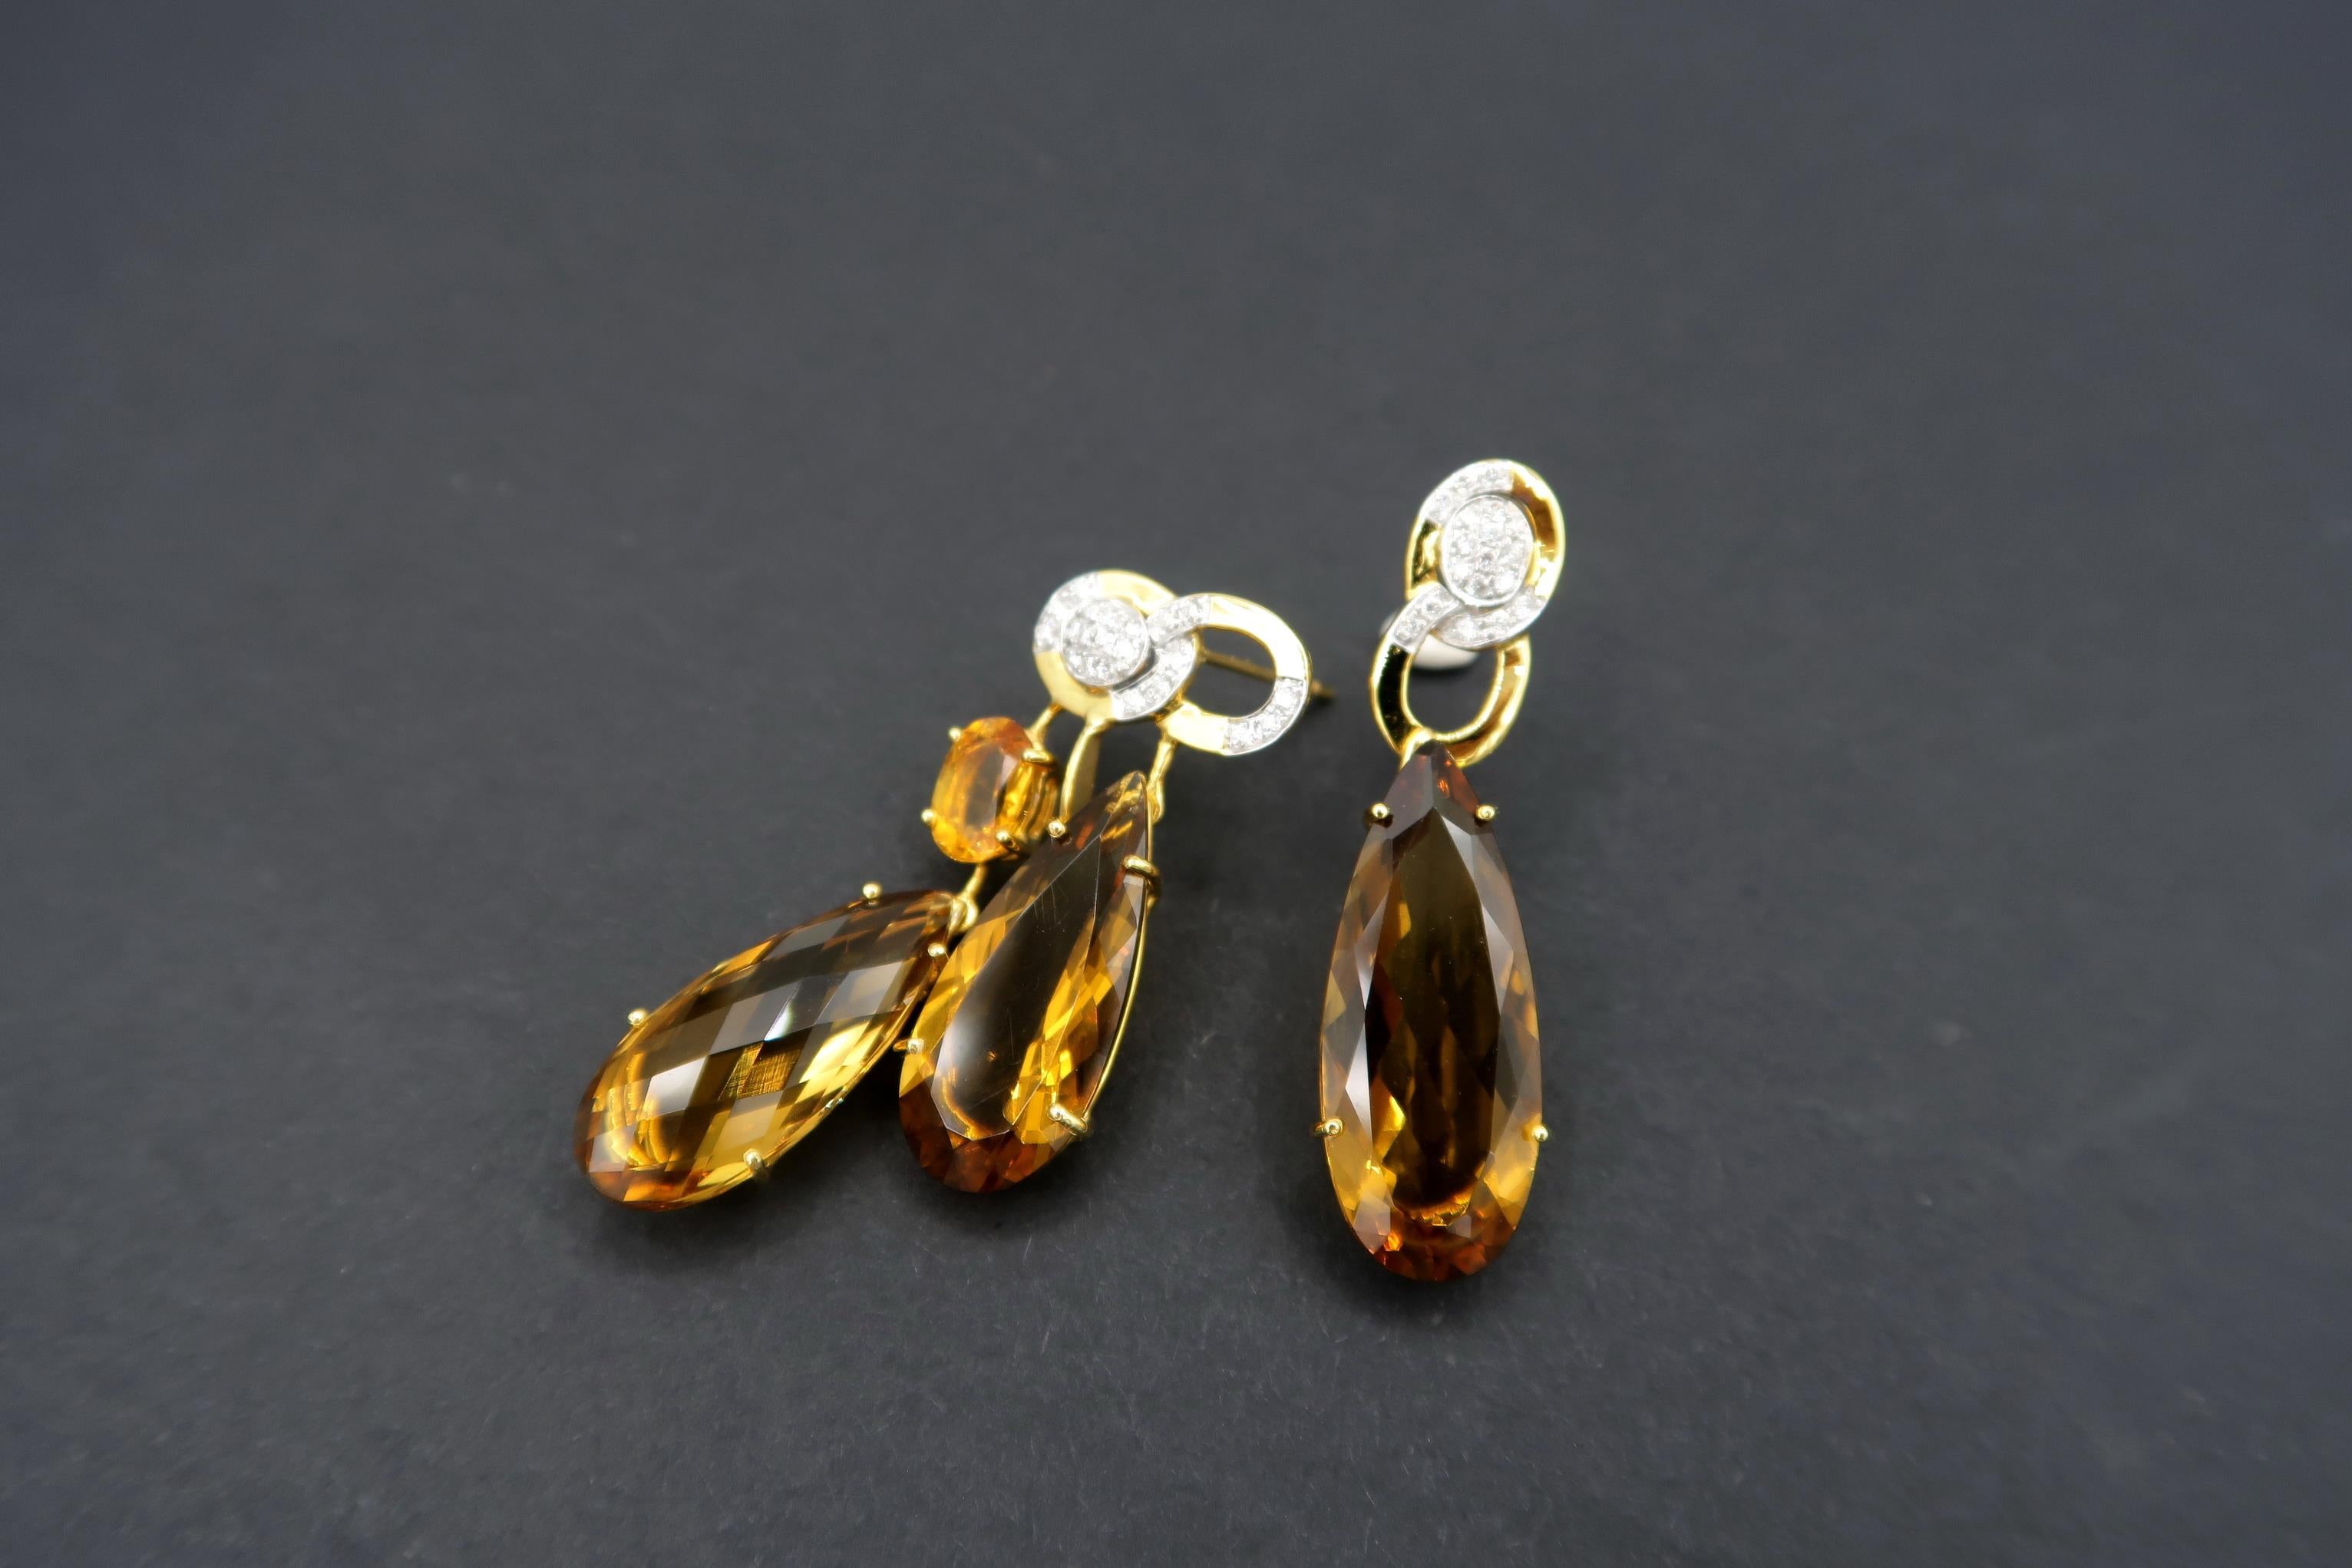 Nonidentical Drop Citrine and Diamond 18K Yellow Gold Pierced Earrings

Diamond: 0.23ct.
Citrine: 22.25cts.
Gold: 18K Yellow Gold 8.16g.